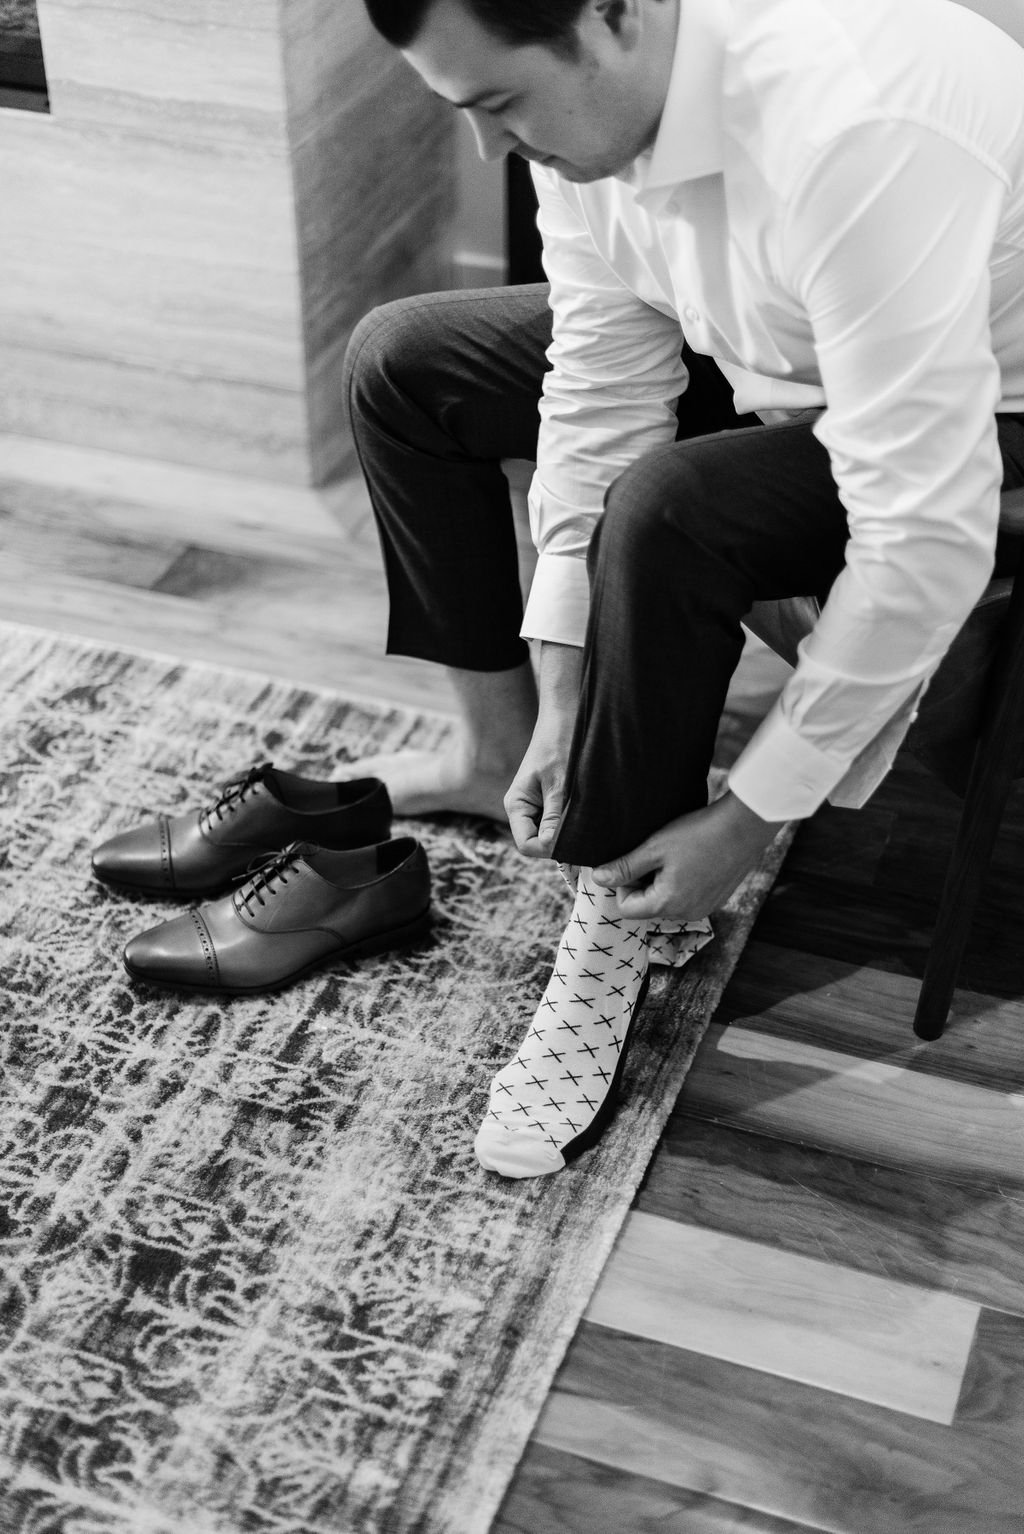 Calgary groom is photographed putting on shoes and socks in preparation for his wedding day